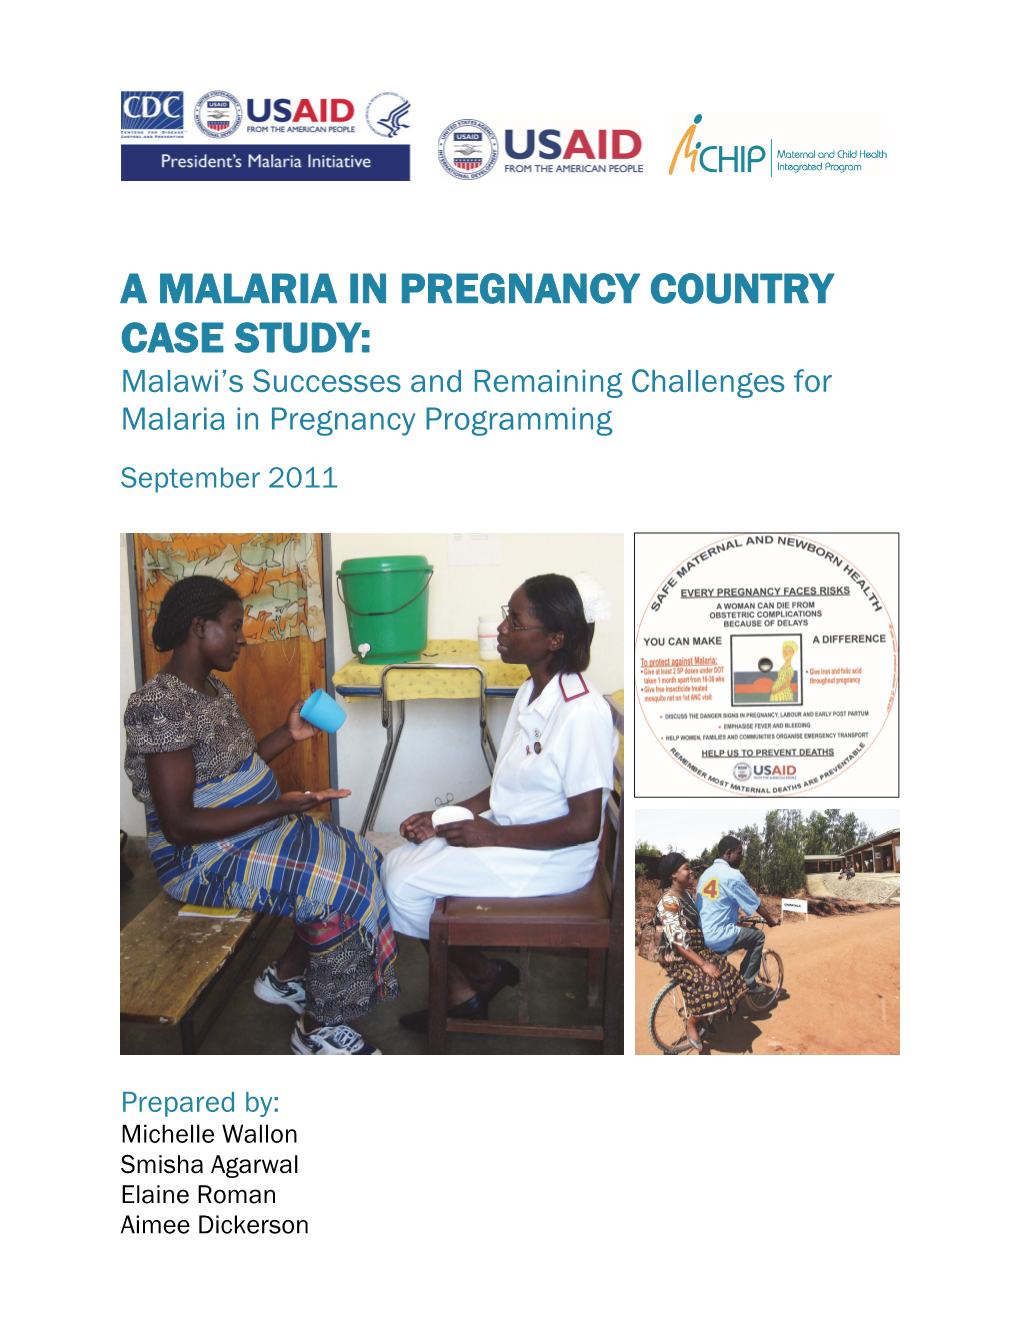 A MALARIA in PREGNANCY COUNTRY CASE STUDY: Malawi’S Successes and Remaining Challenges for Malaria in Pregnancy Programming